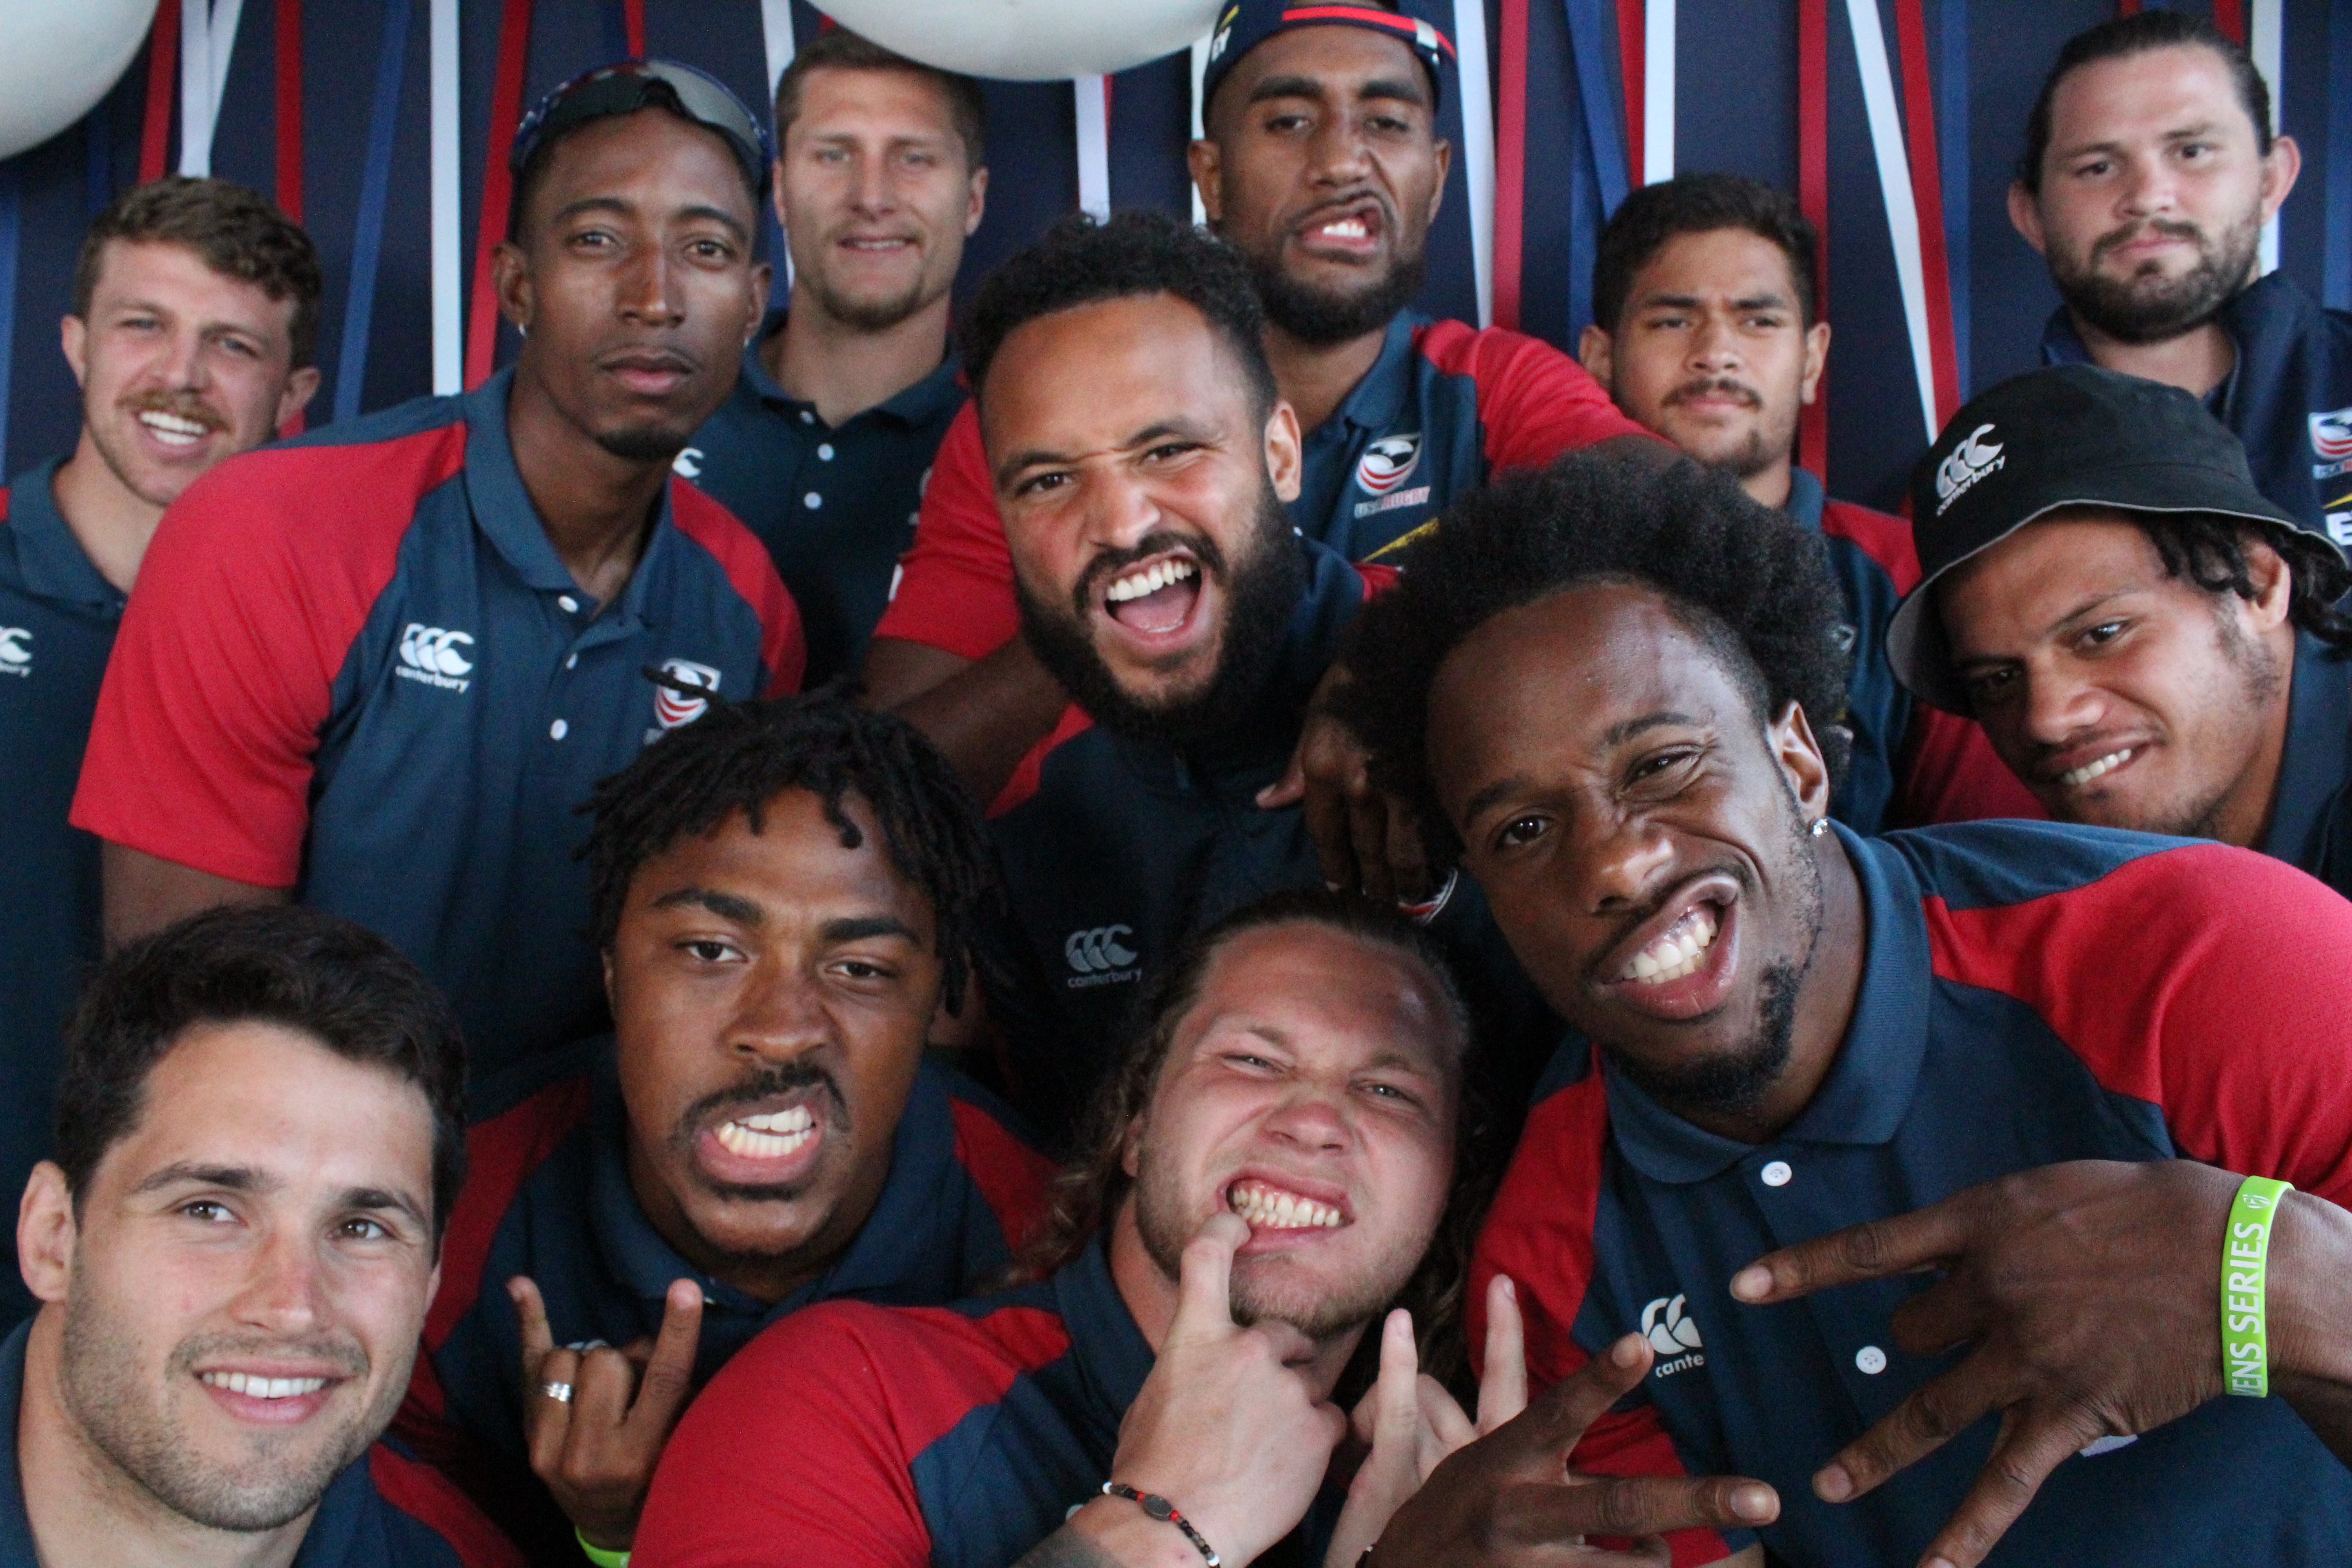 Members of the US men’s sevens team at a Golden Eagles event in Cape Town in December. Photo: Handout